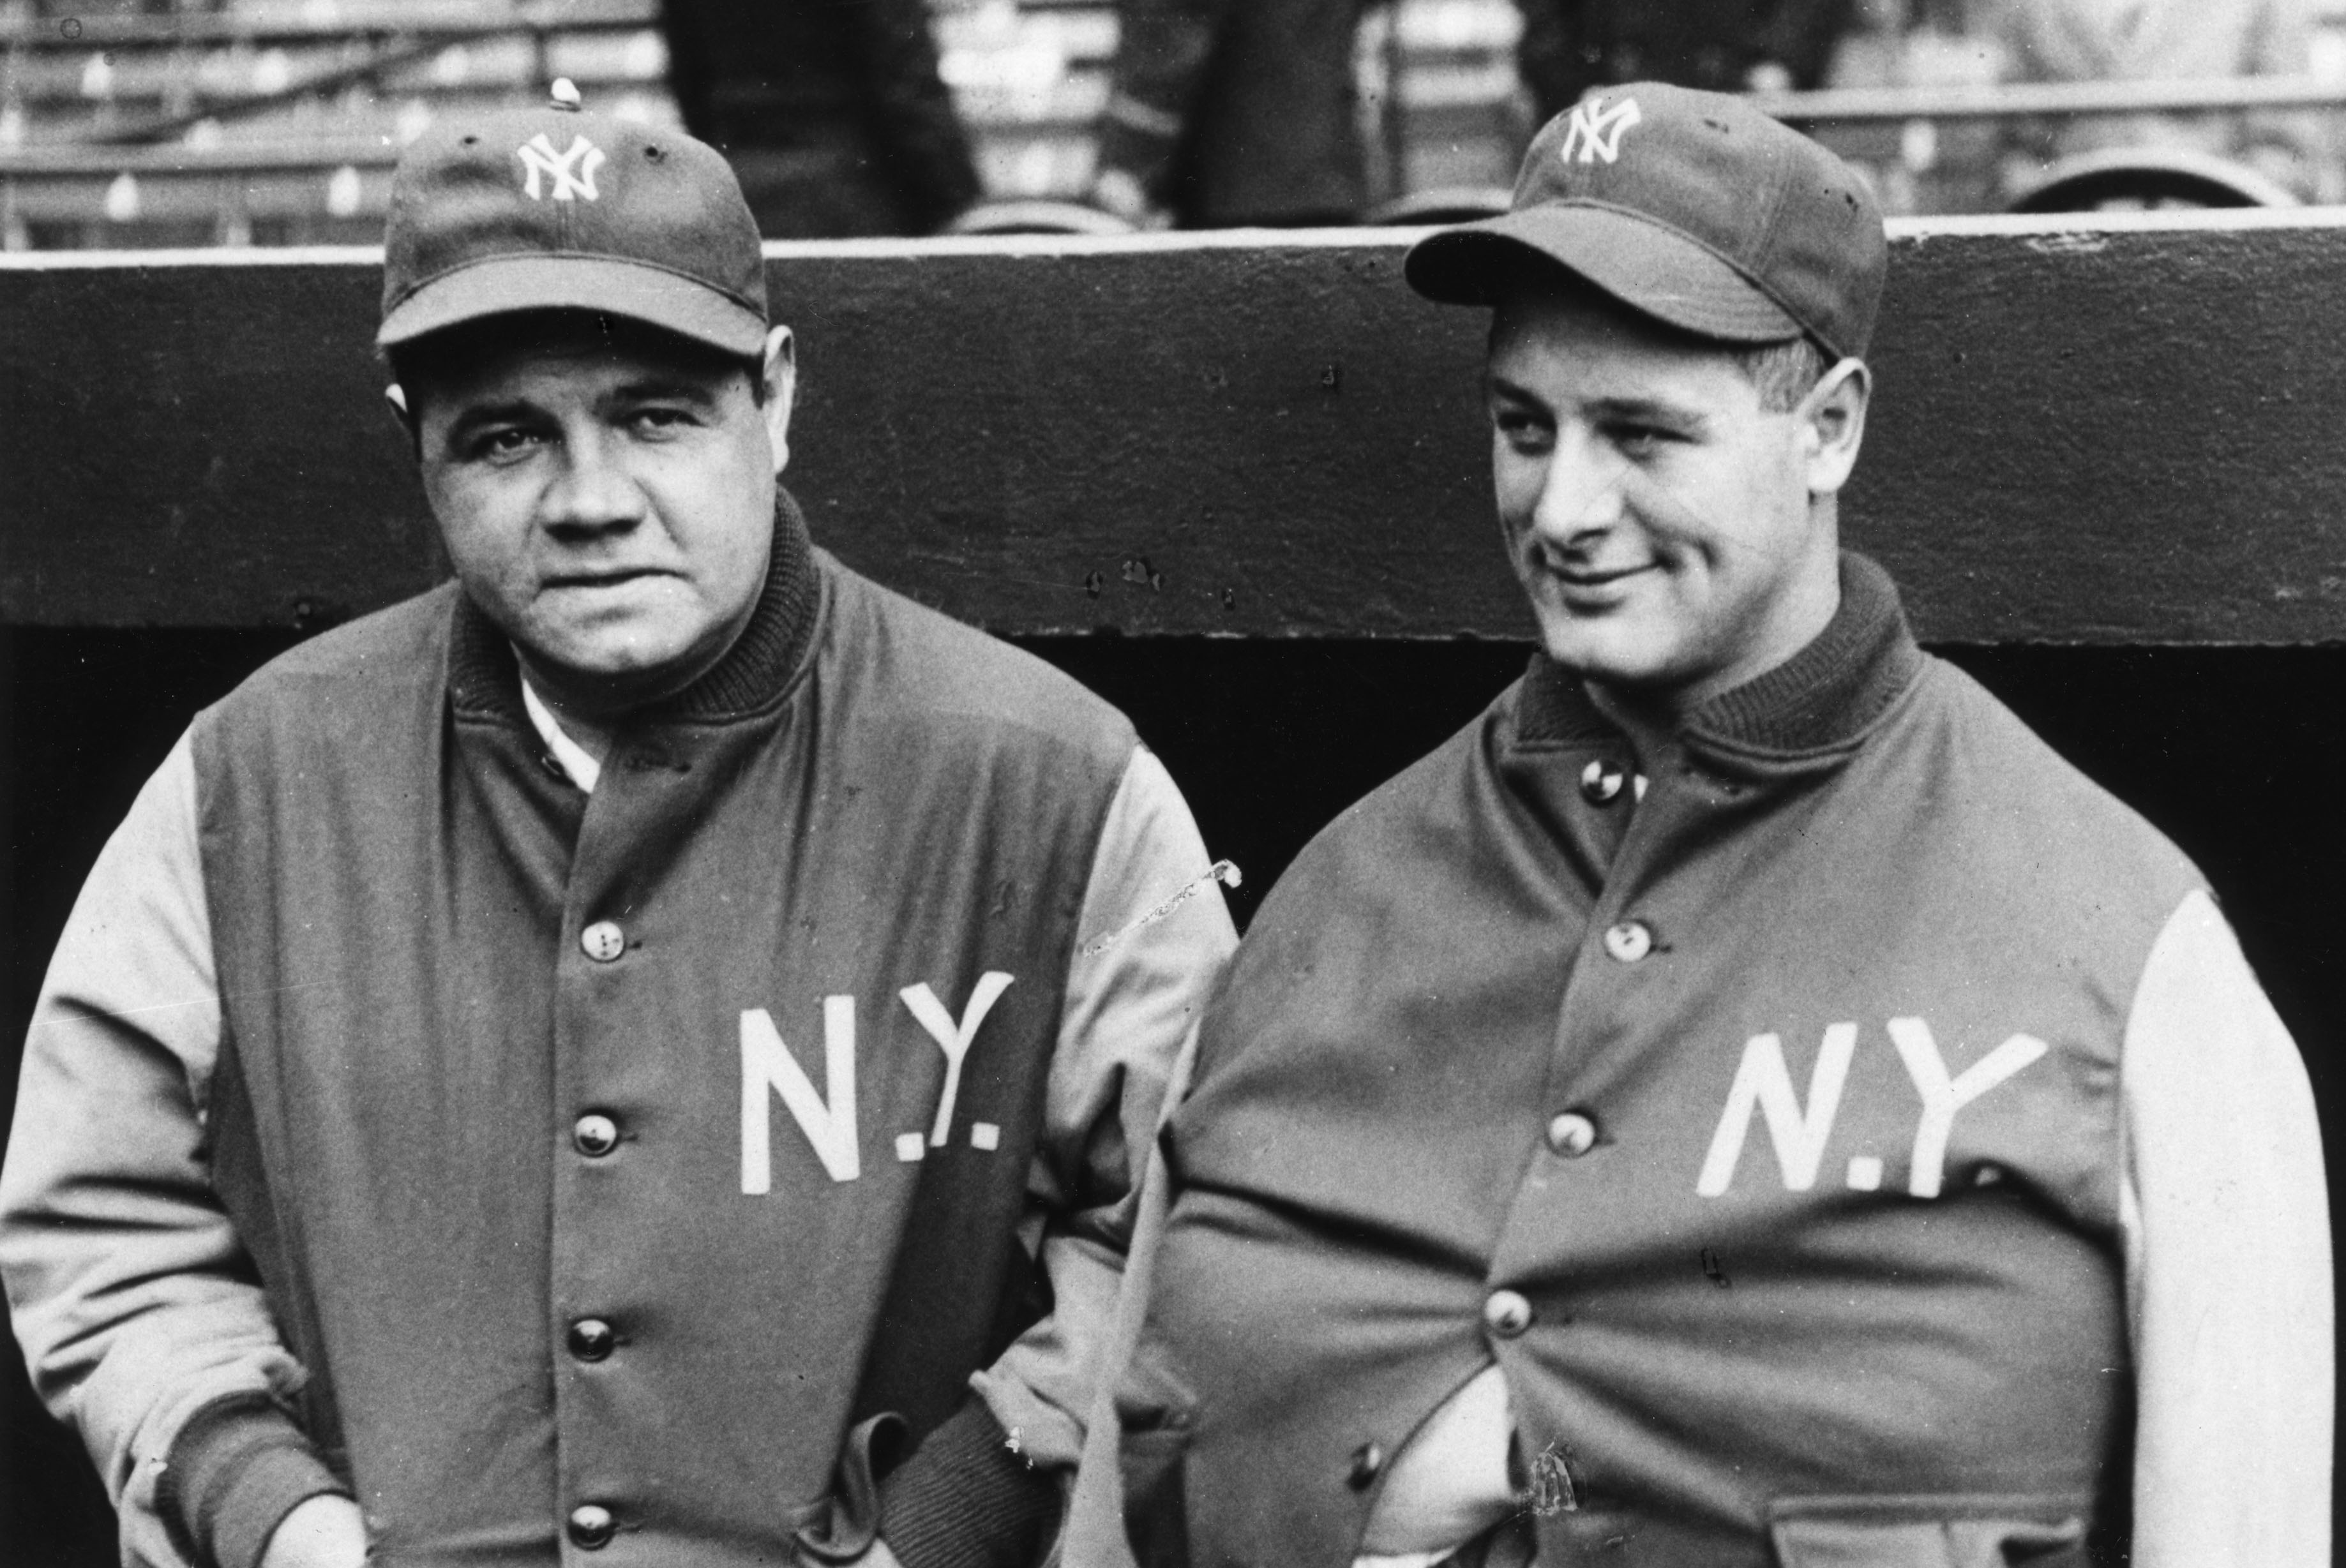 Babe Ruth Lou Gehrig 1929